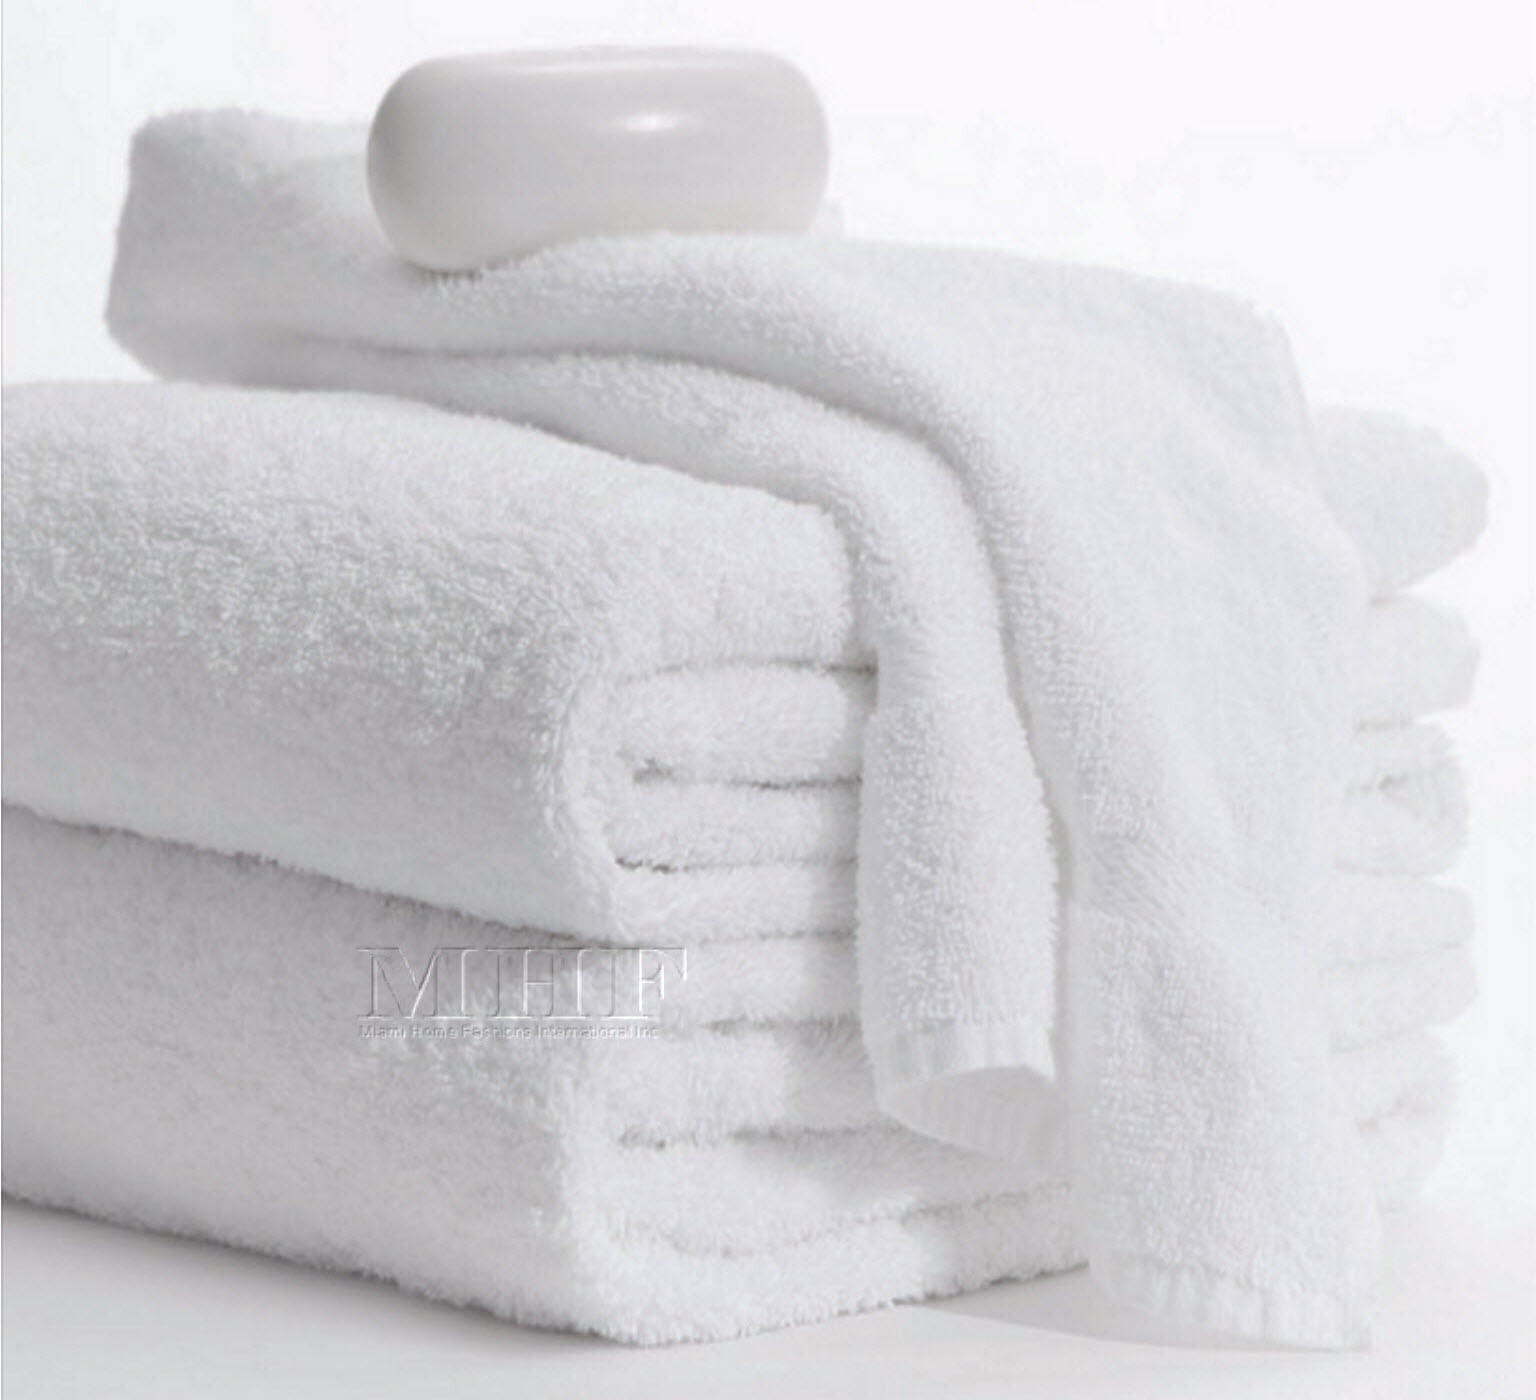 Bath Towels-6 Pack-22x44 inches-White-6.0 Lbs 100% Cotton 